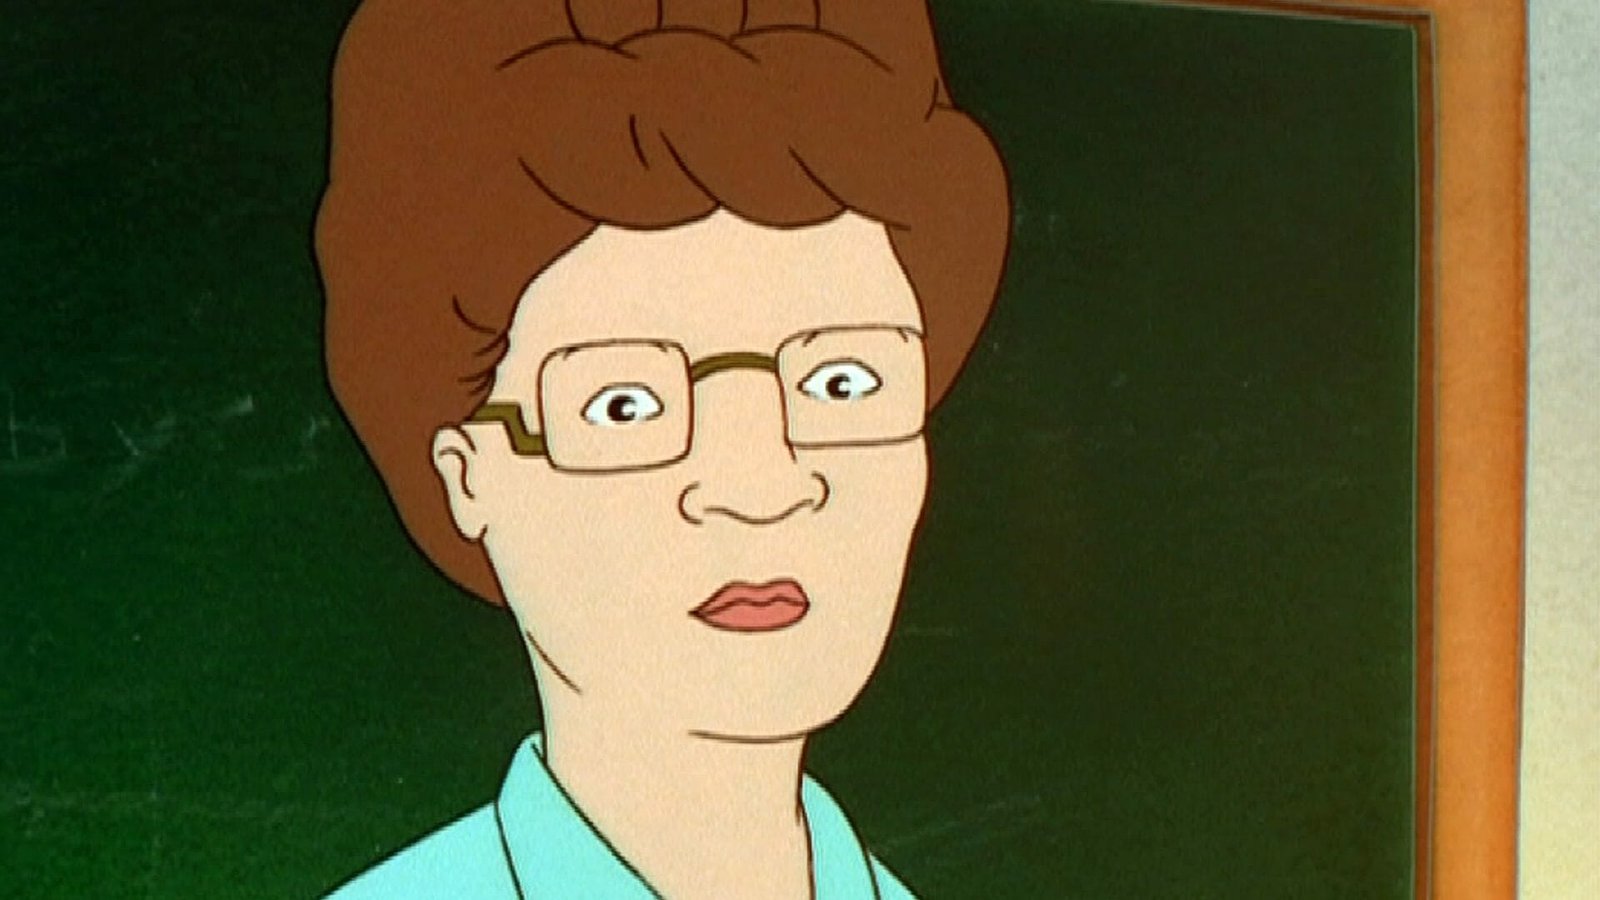 Best king of the hill episodes: Square Peggy (Season 1, Episode 2)